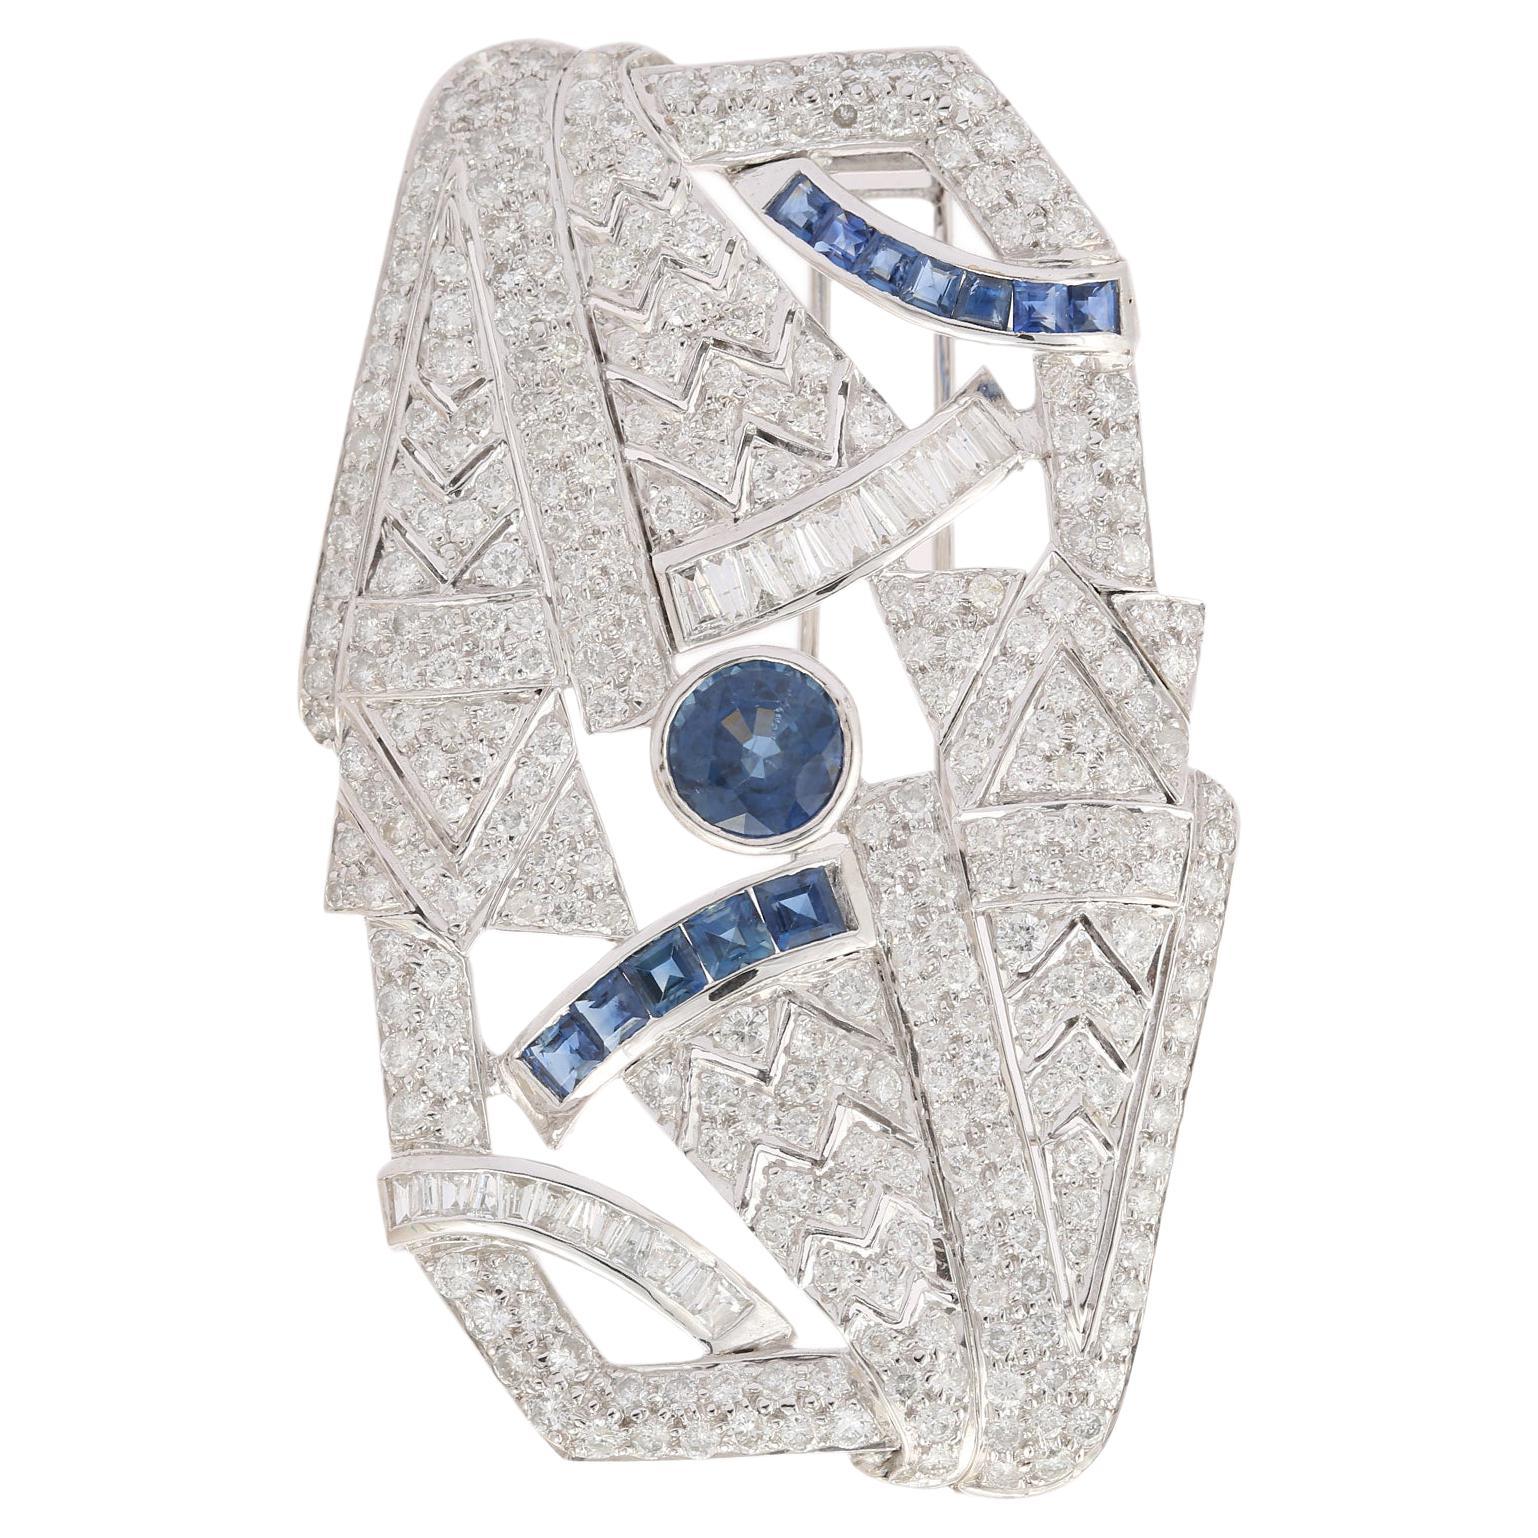  Art Deco 5.96 CTW Diamond and 3.9 CTW Sapphire Brooch 18k Solid White Gold For Sale